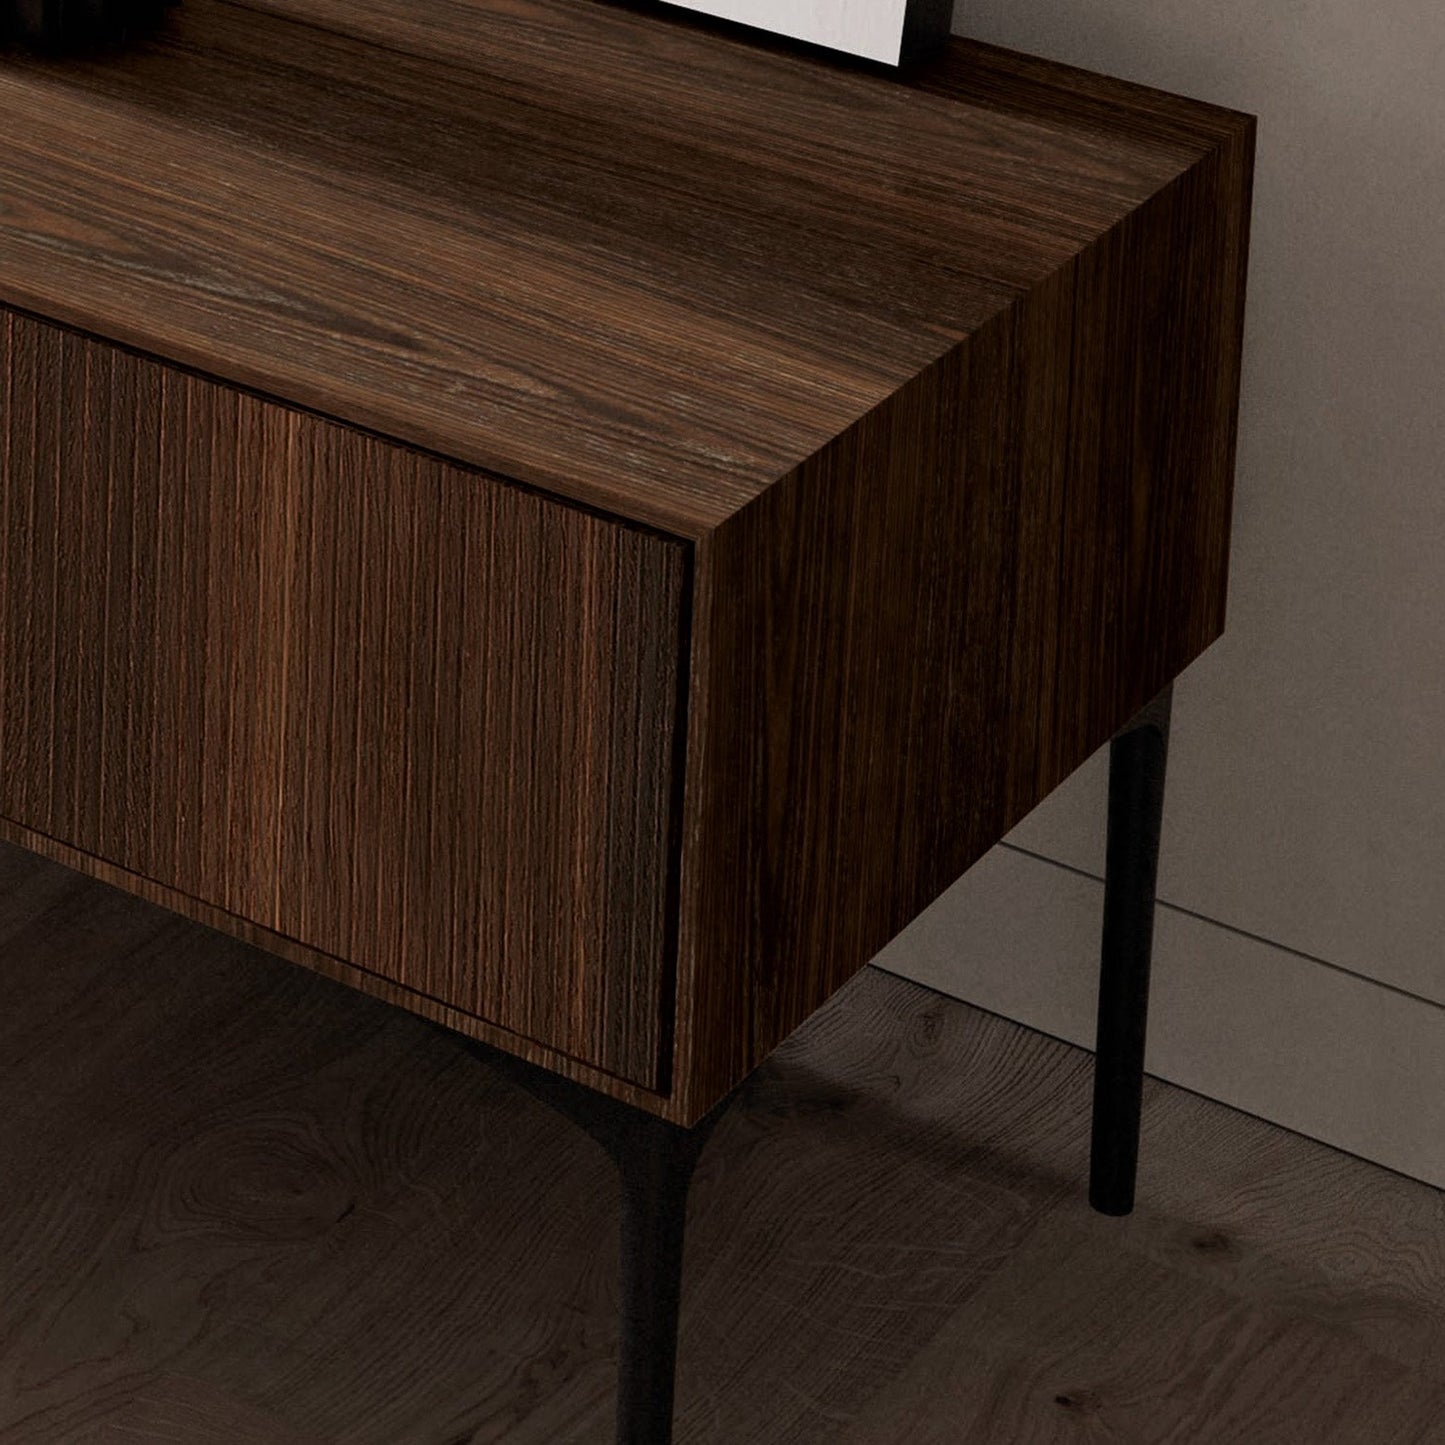 Kompos bedside table by Dall'Agnese